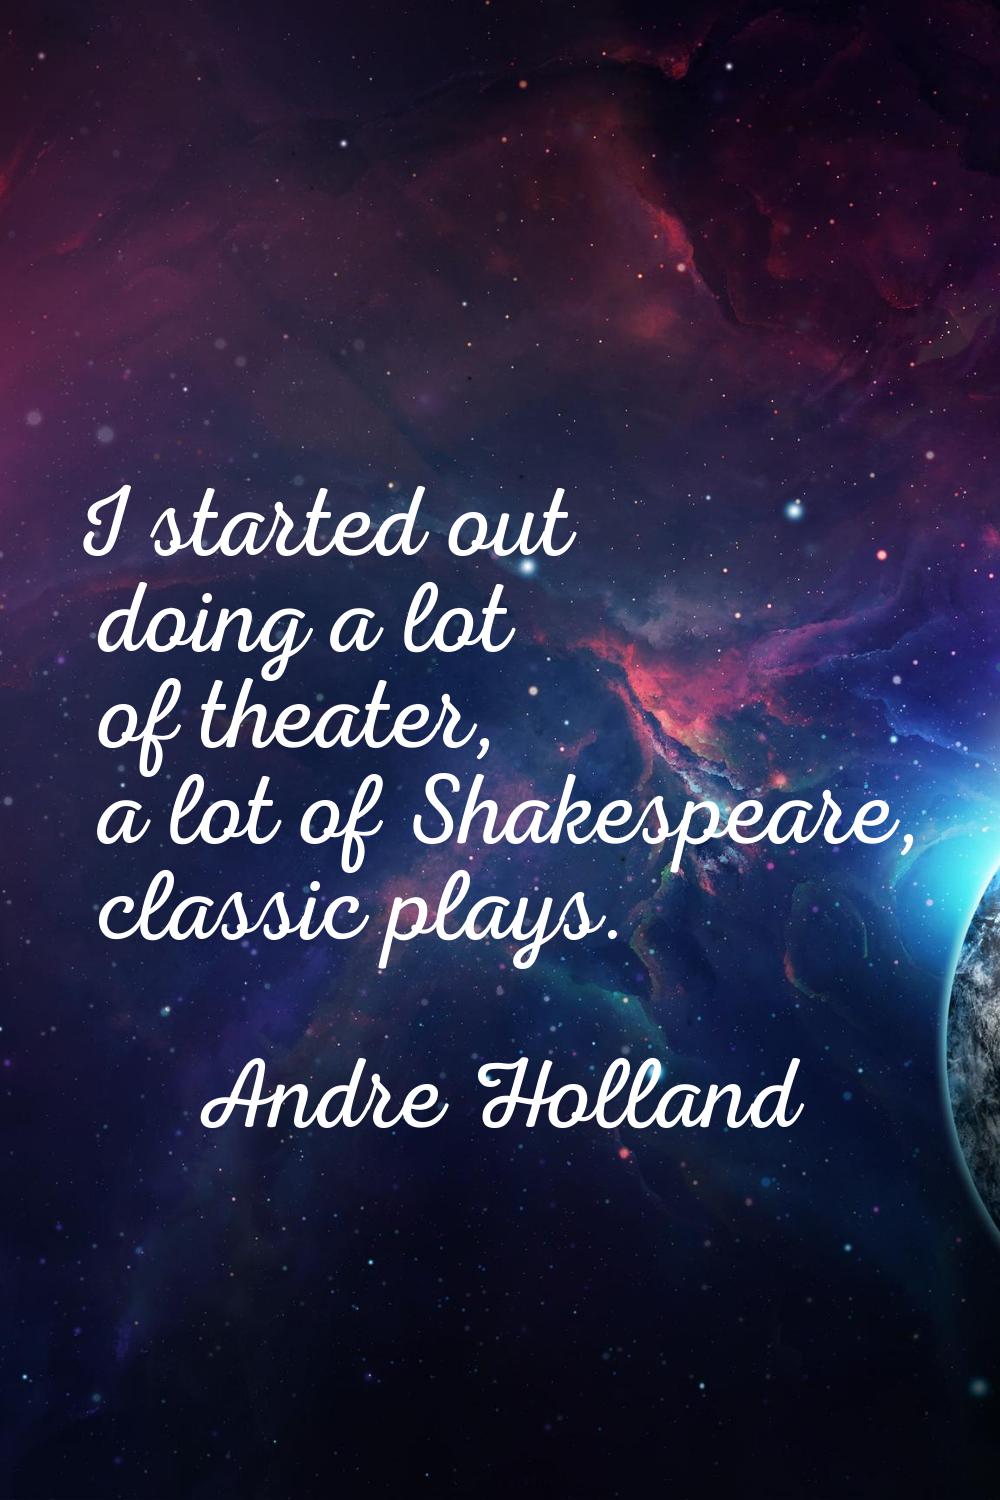 I started out doing a lot of theater, a lot of Shakespeare, classic plays.